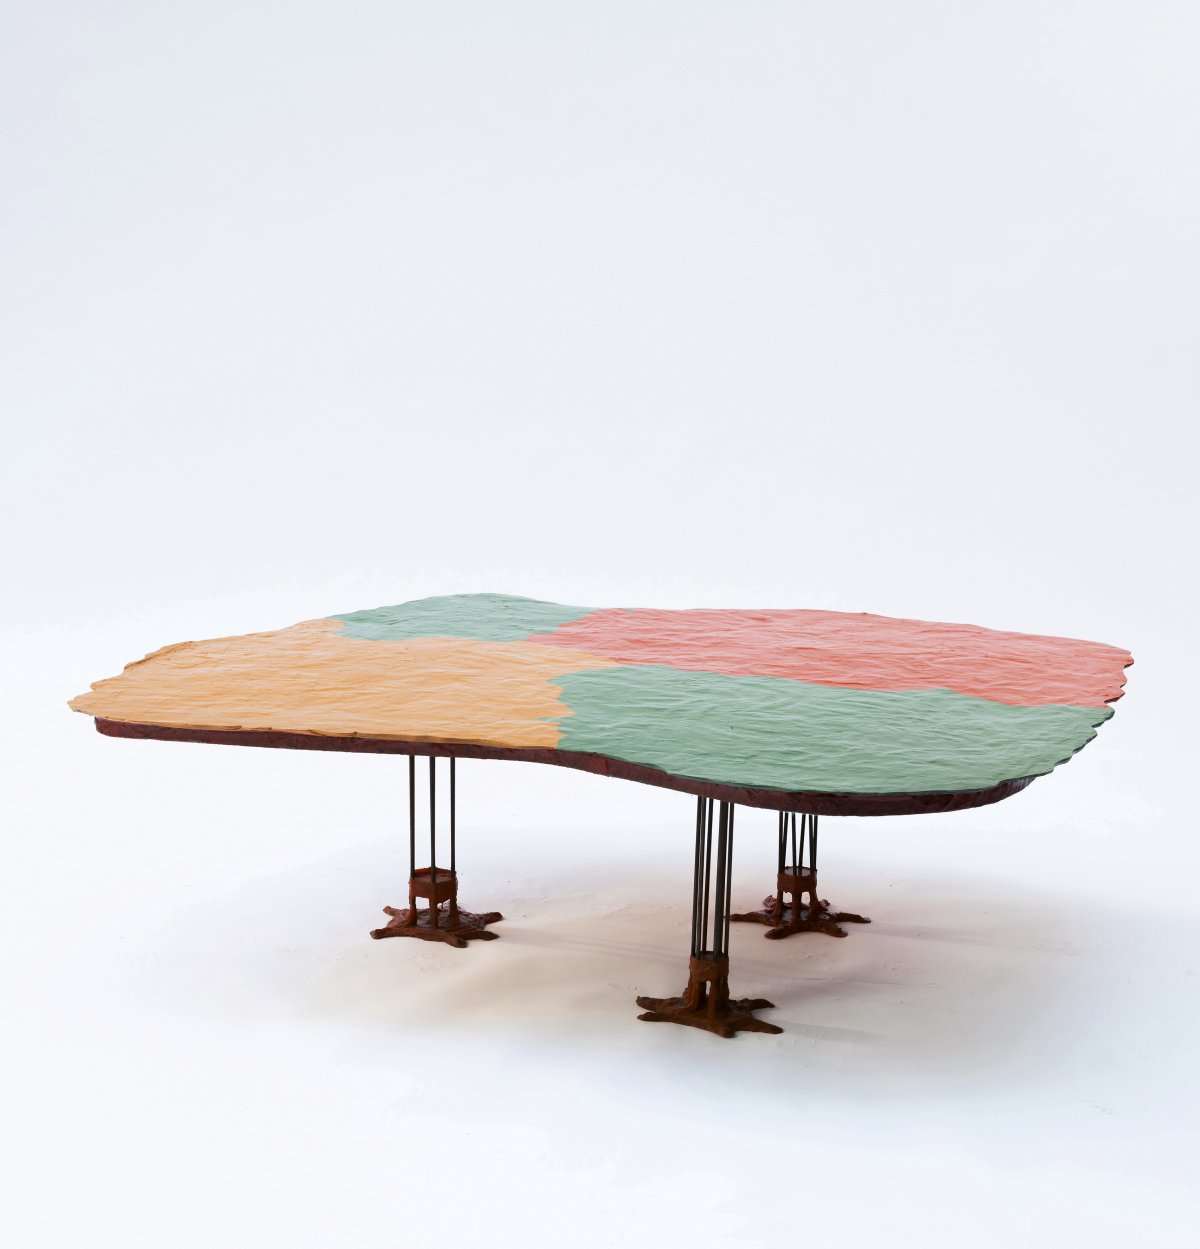 Gaetano Pesce, One-off table, 1992/93One-off table, 1992/93H. 44 x 149 x 128 cm. Synthetic resin, - Image 2 of 9